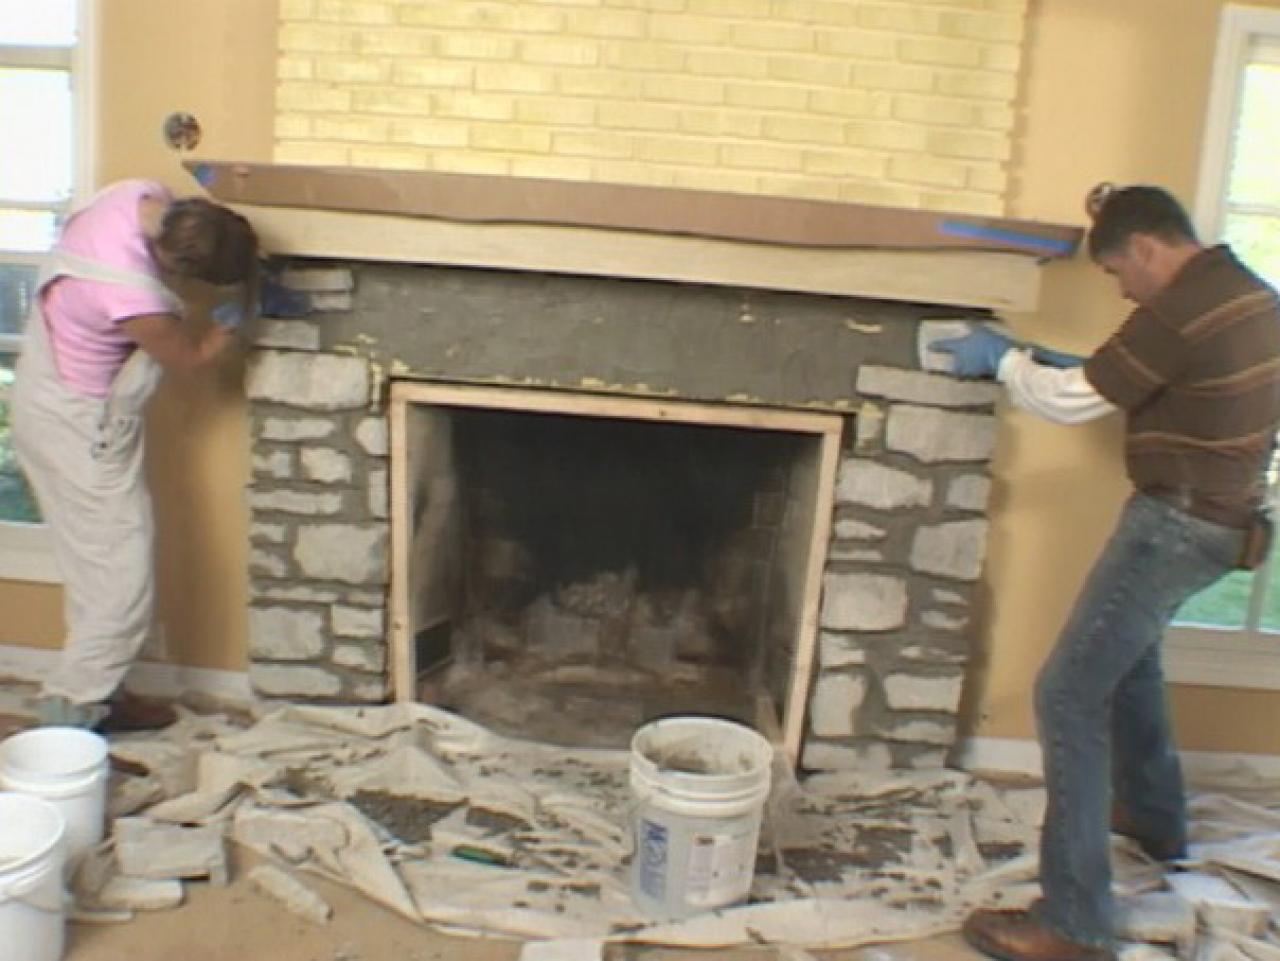 A Fireplace Mantel And Add Stone Veneer, How To Install Natural Stone Around Fireplace